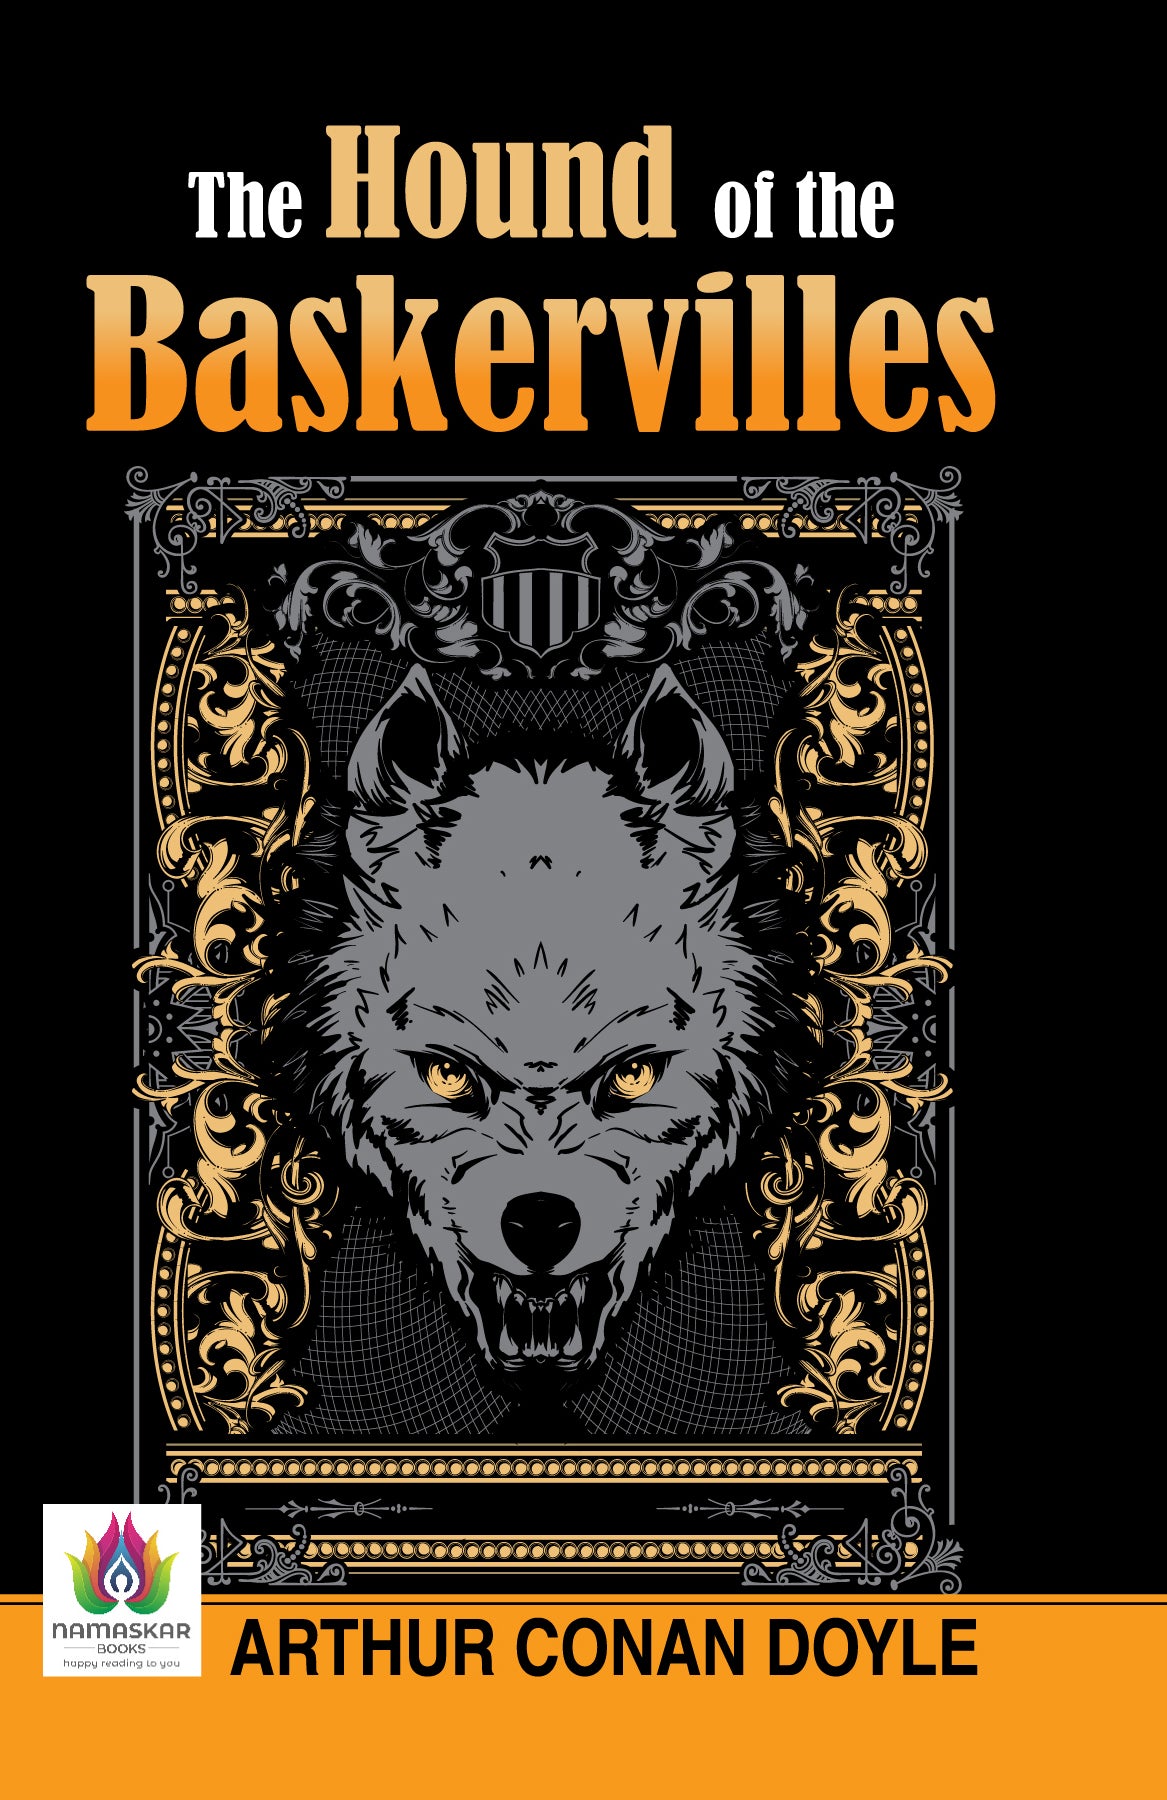 THE HOUND OF THE BASKERVILLES Book Online available at rekhtabooks.com